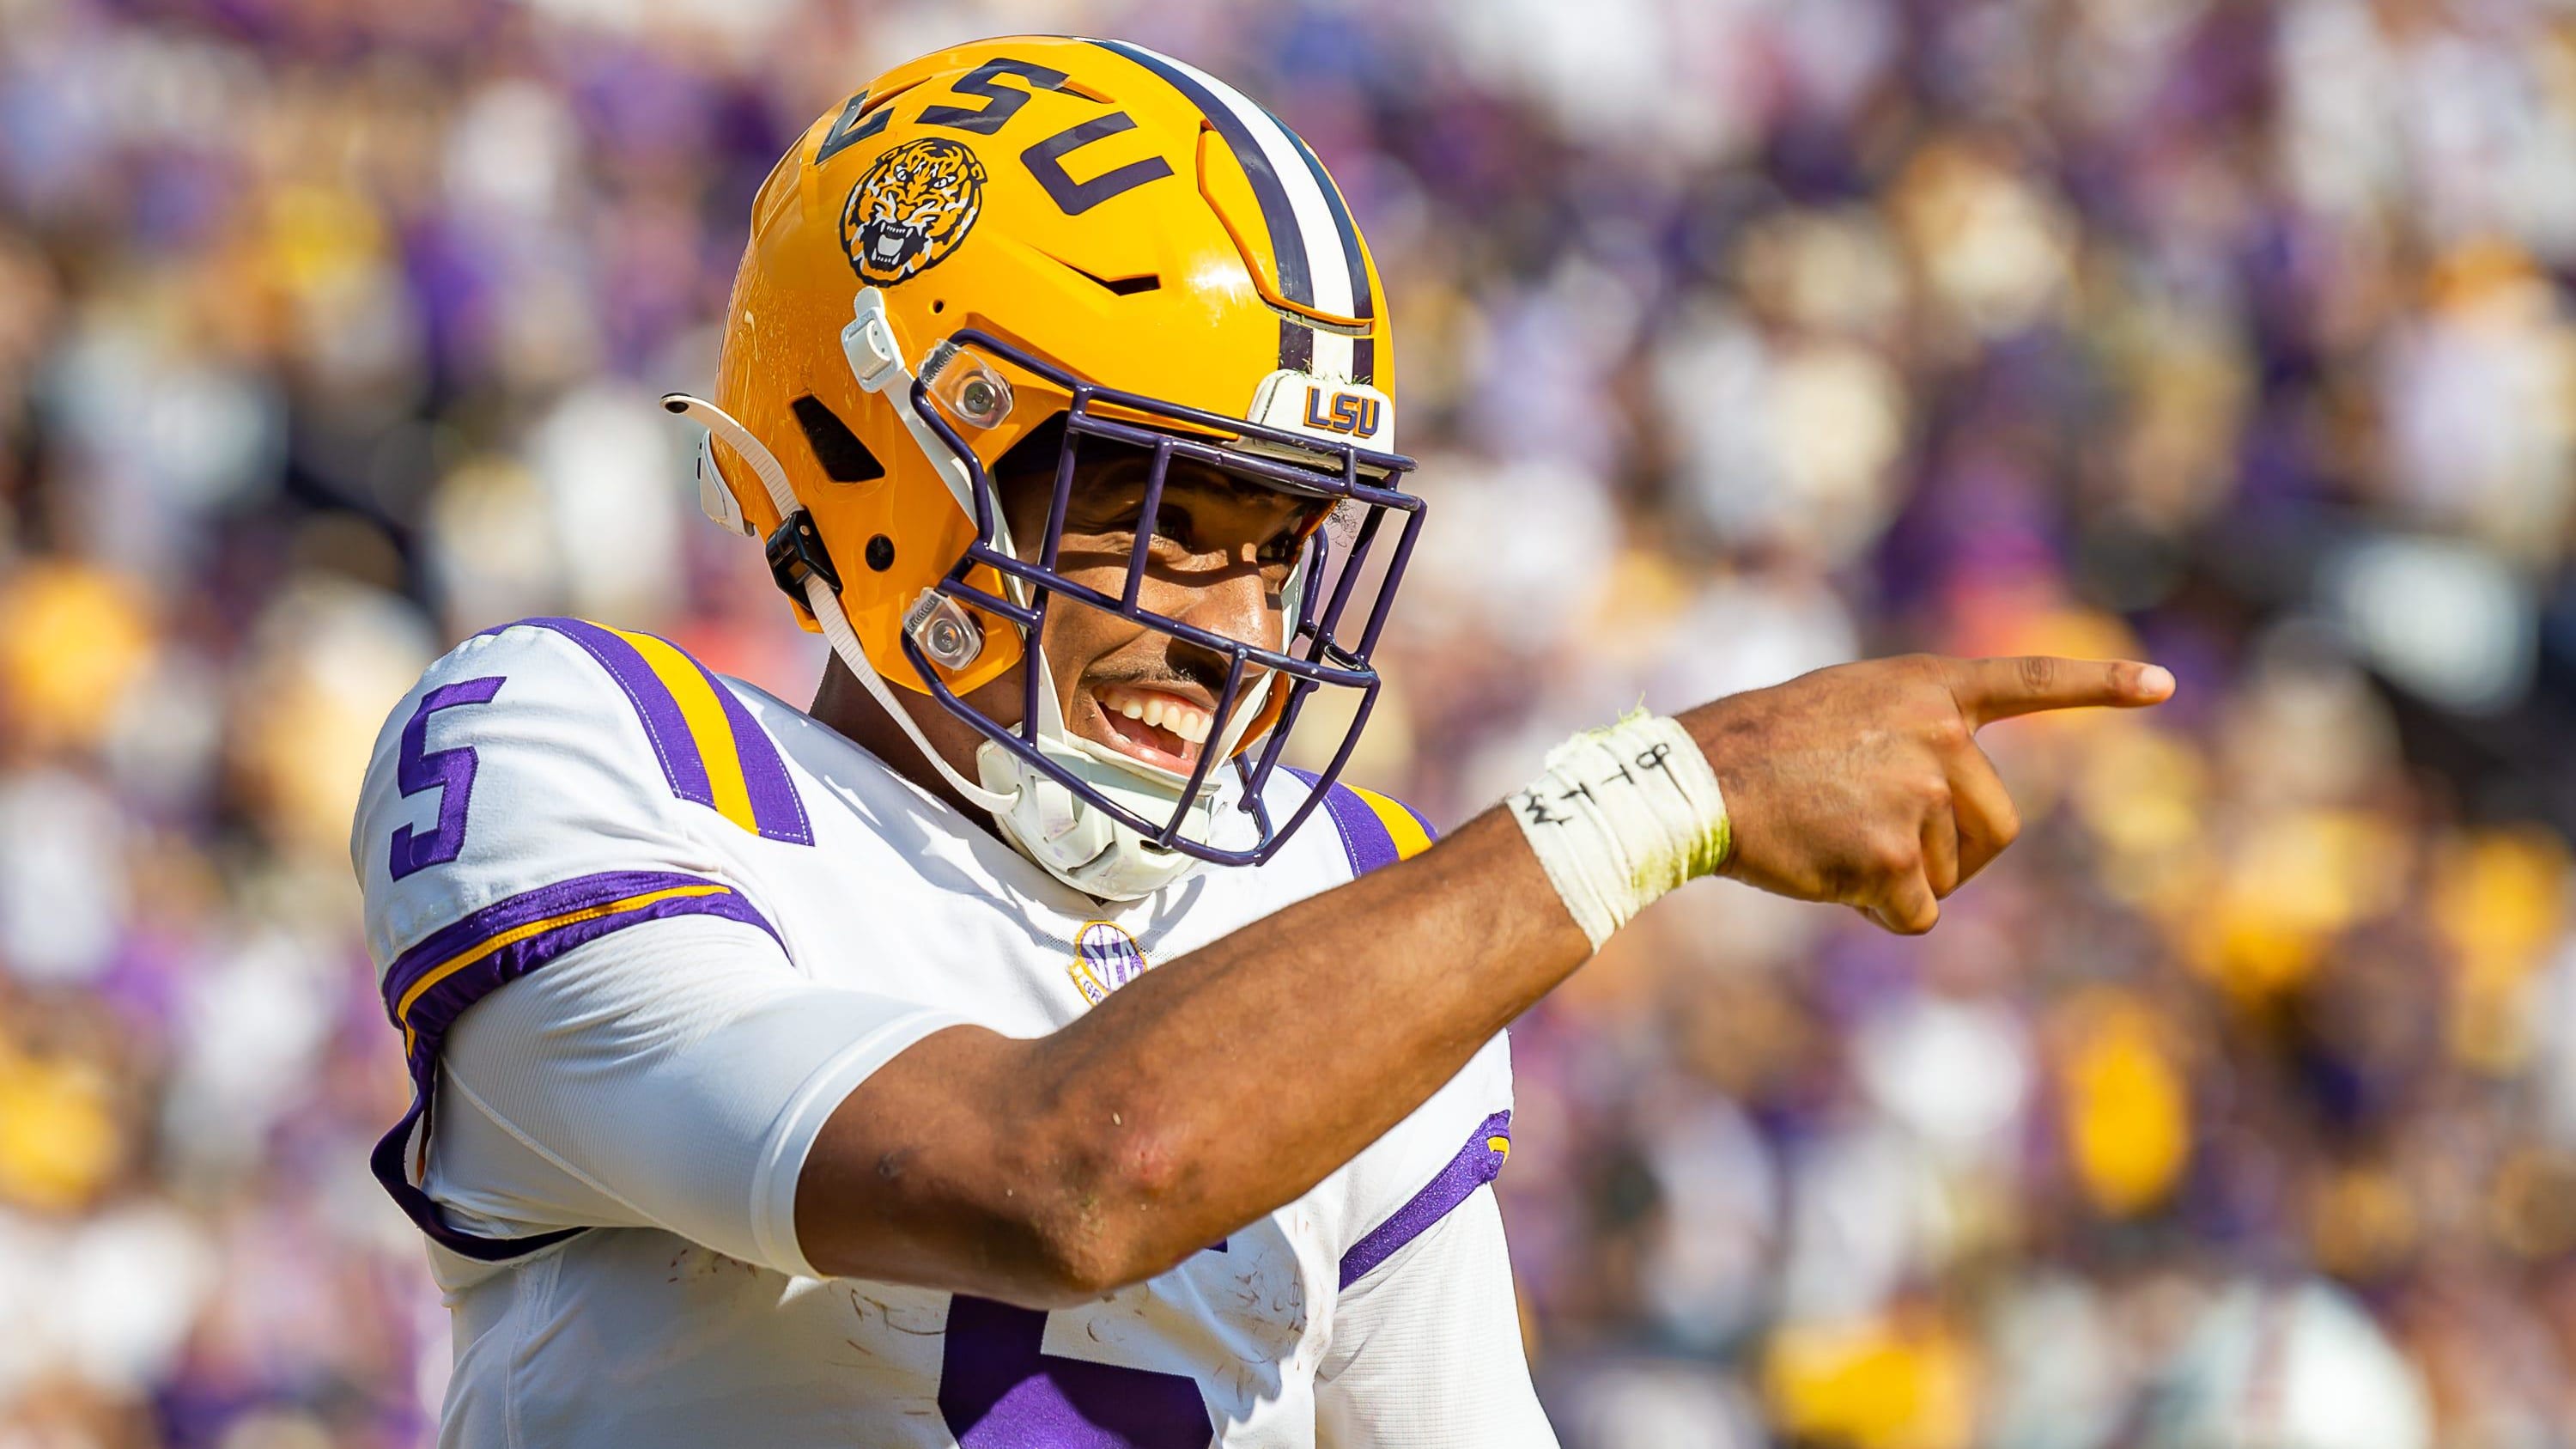 Quarterback Jayden Daniels celebrates after scoring a touchdown as the LSU Tigers take on Ole Miss.